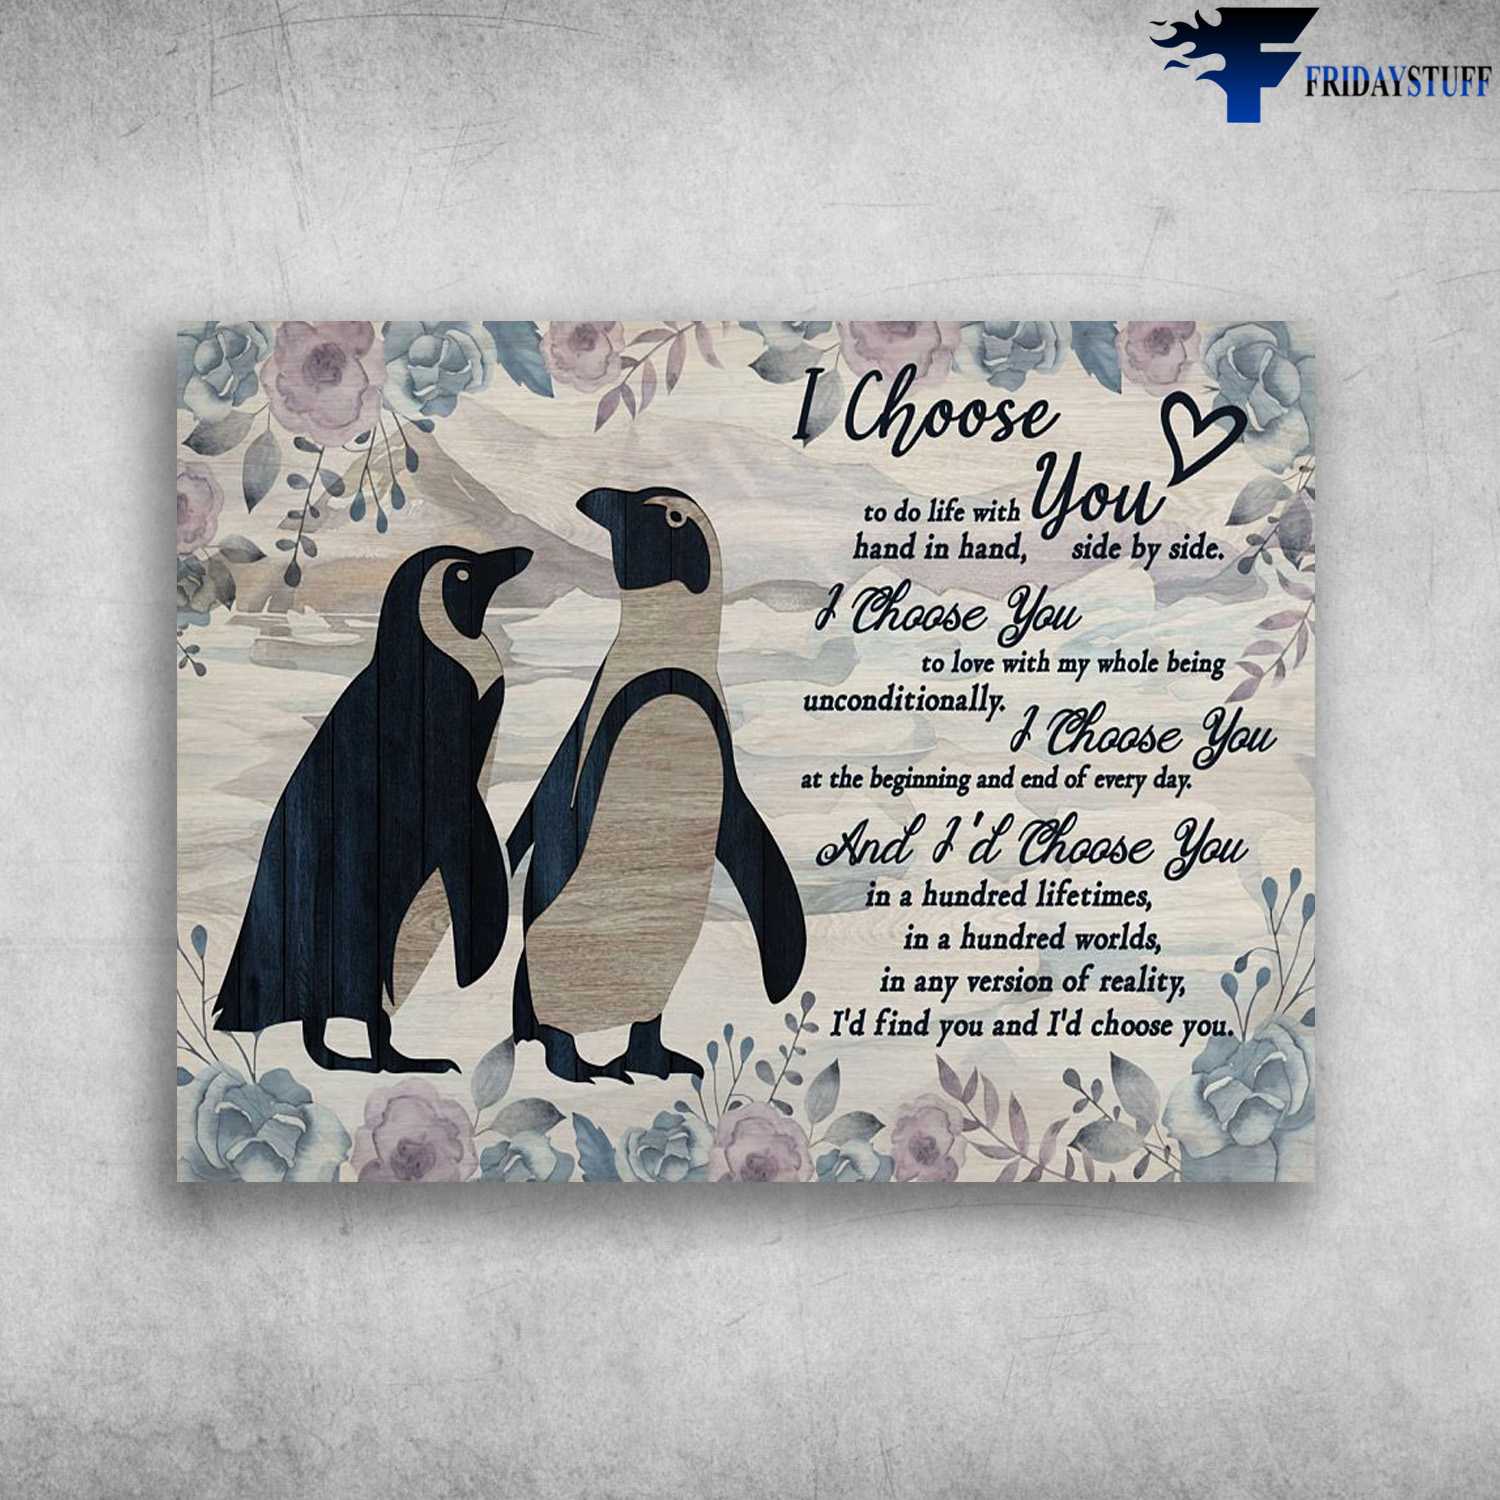 Penguin Couple, I Choose You, To Do Life With Hand In Hand, Side By Side, I Choose You To Love With My Whole, Being Unconditionally